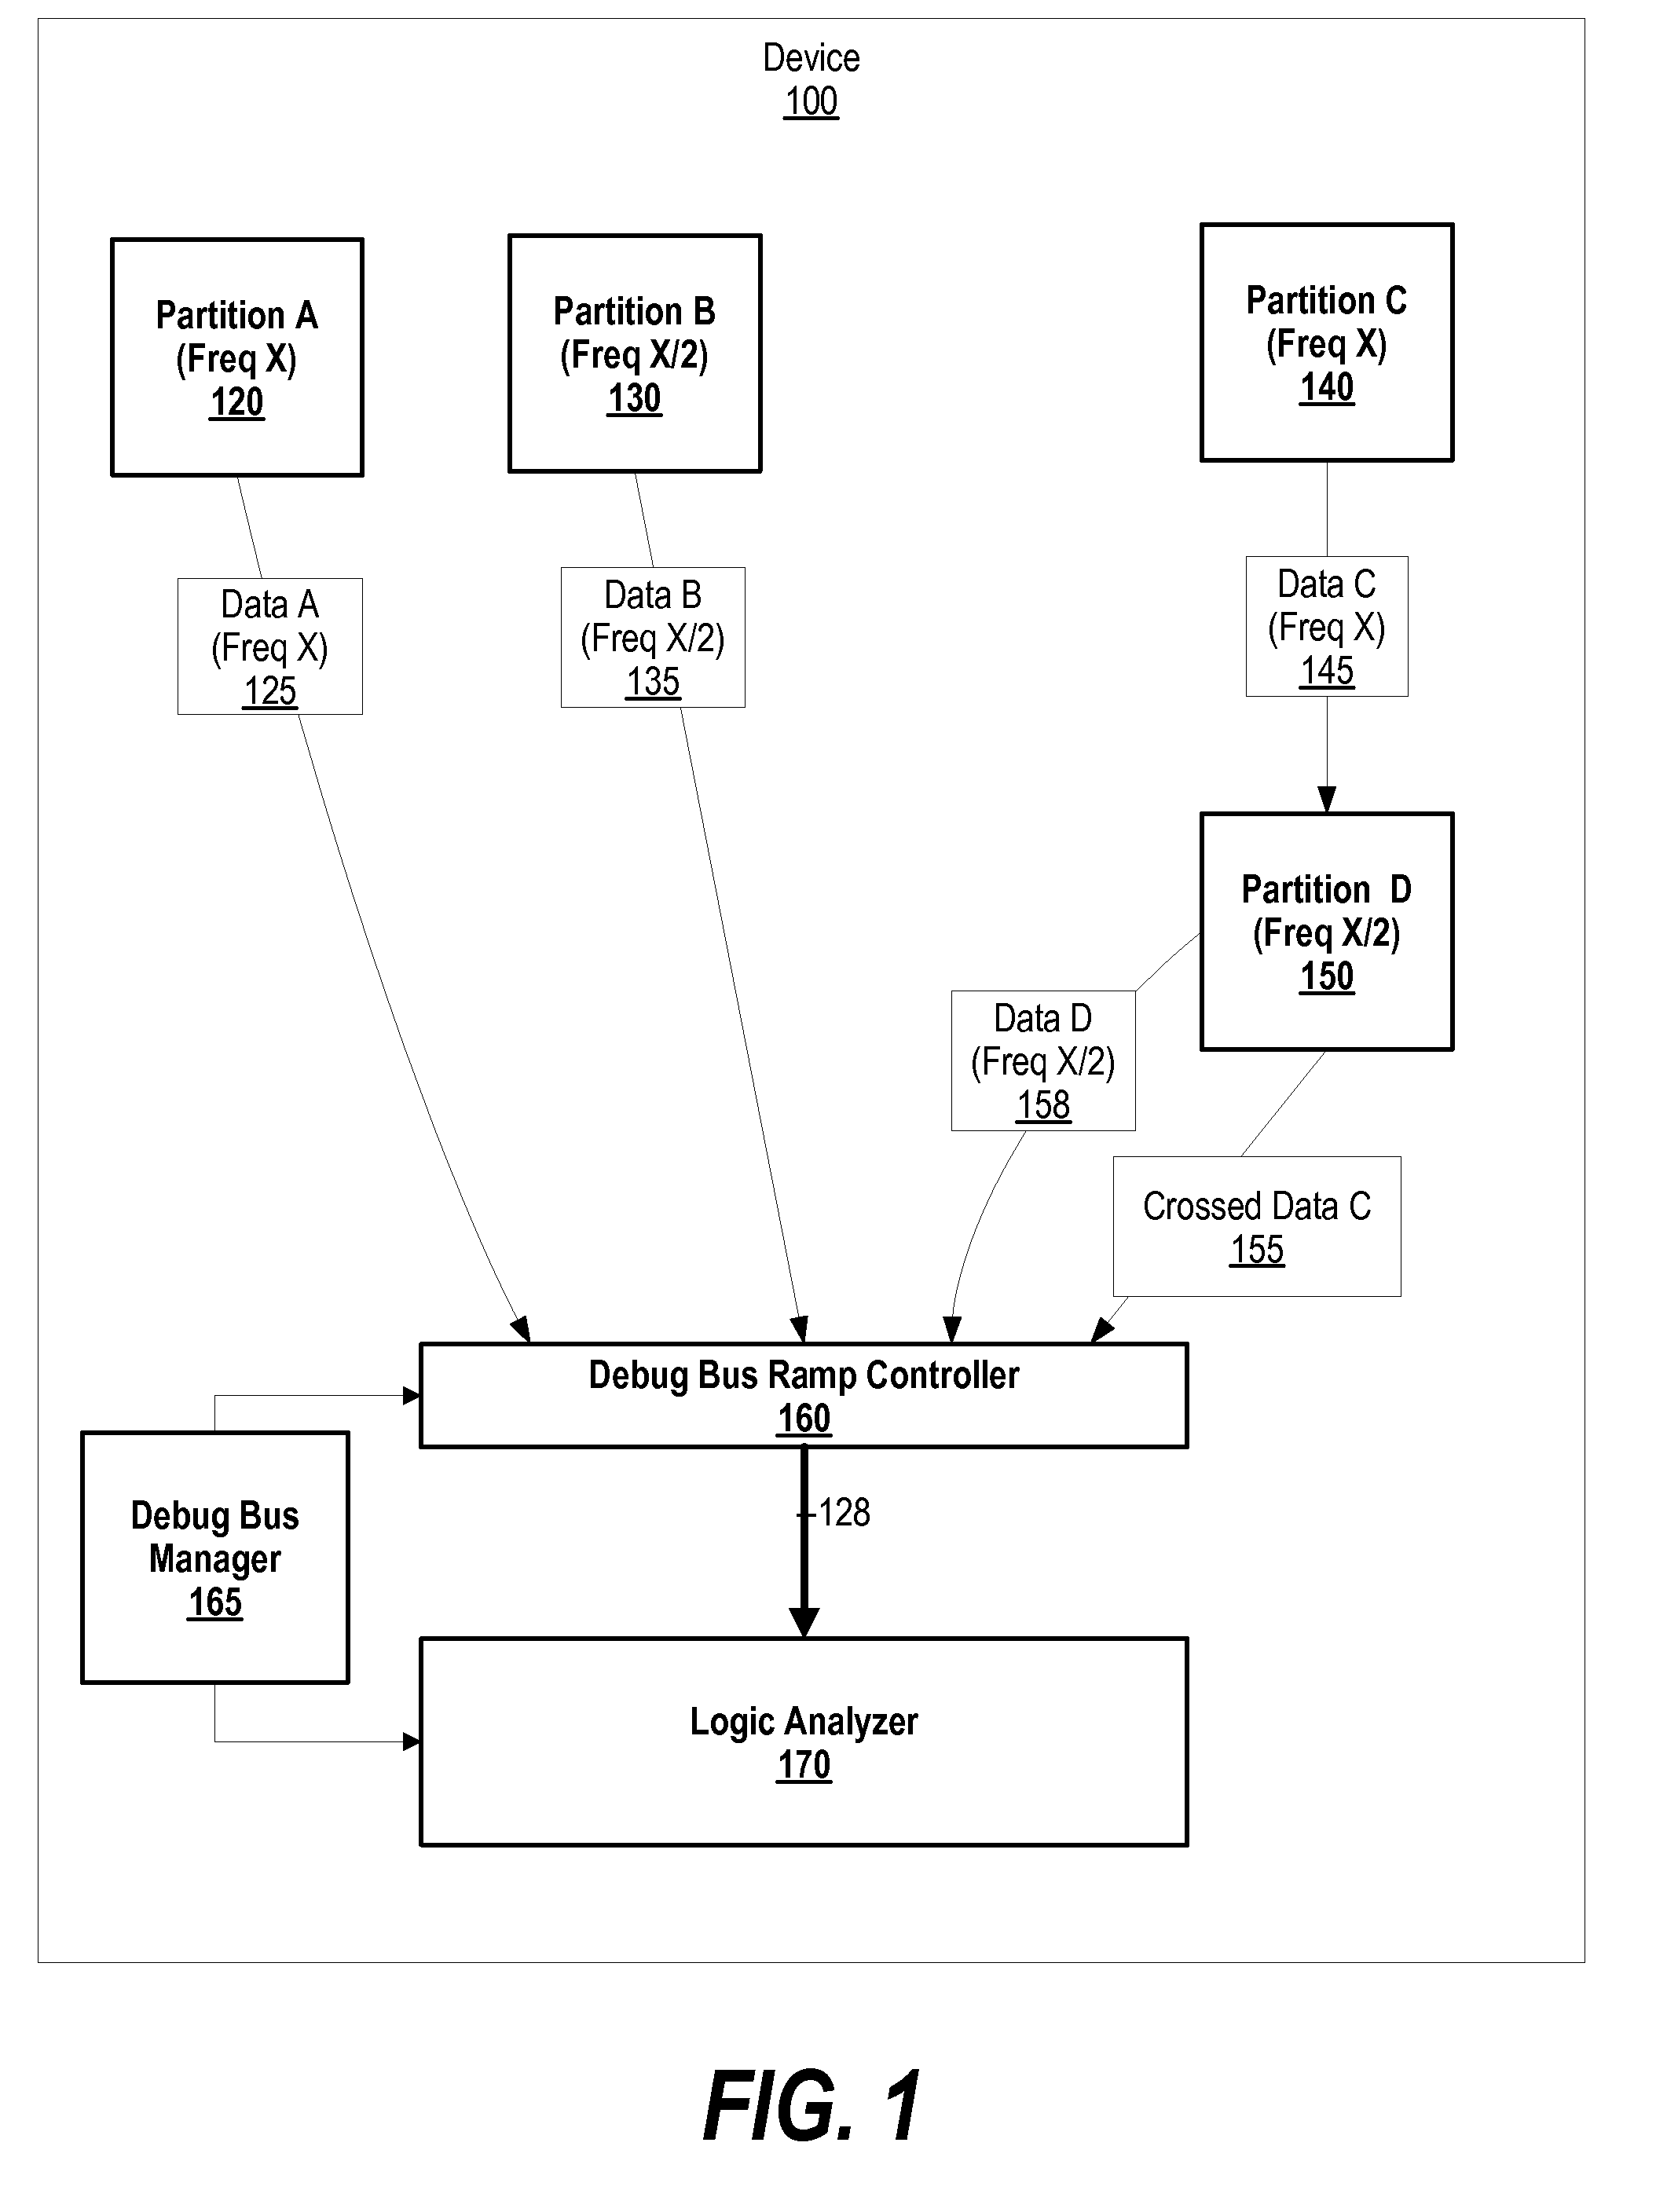 System and Method for Identifying and Manipulating Logic Analyzer Data from Multiple Clock Domains